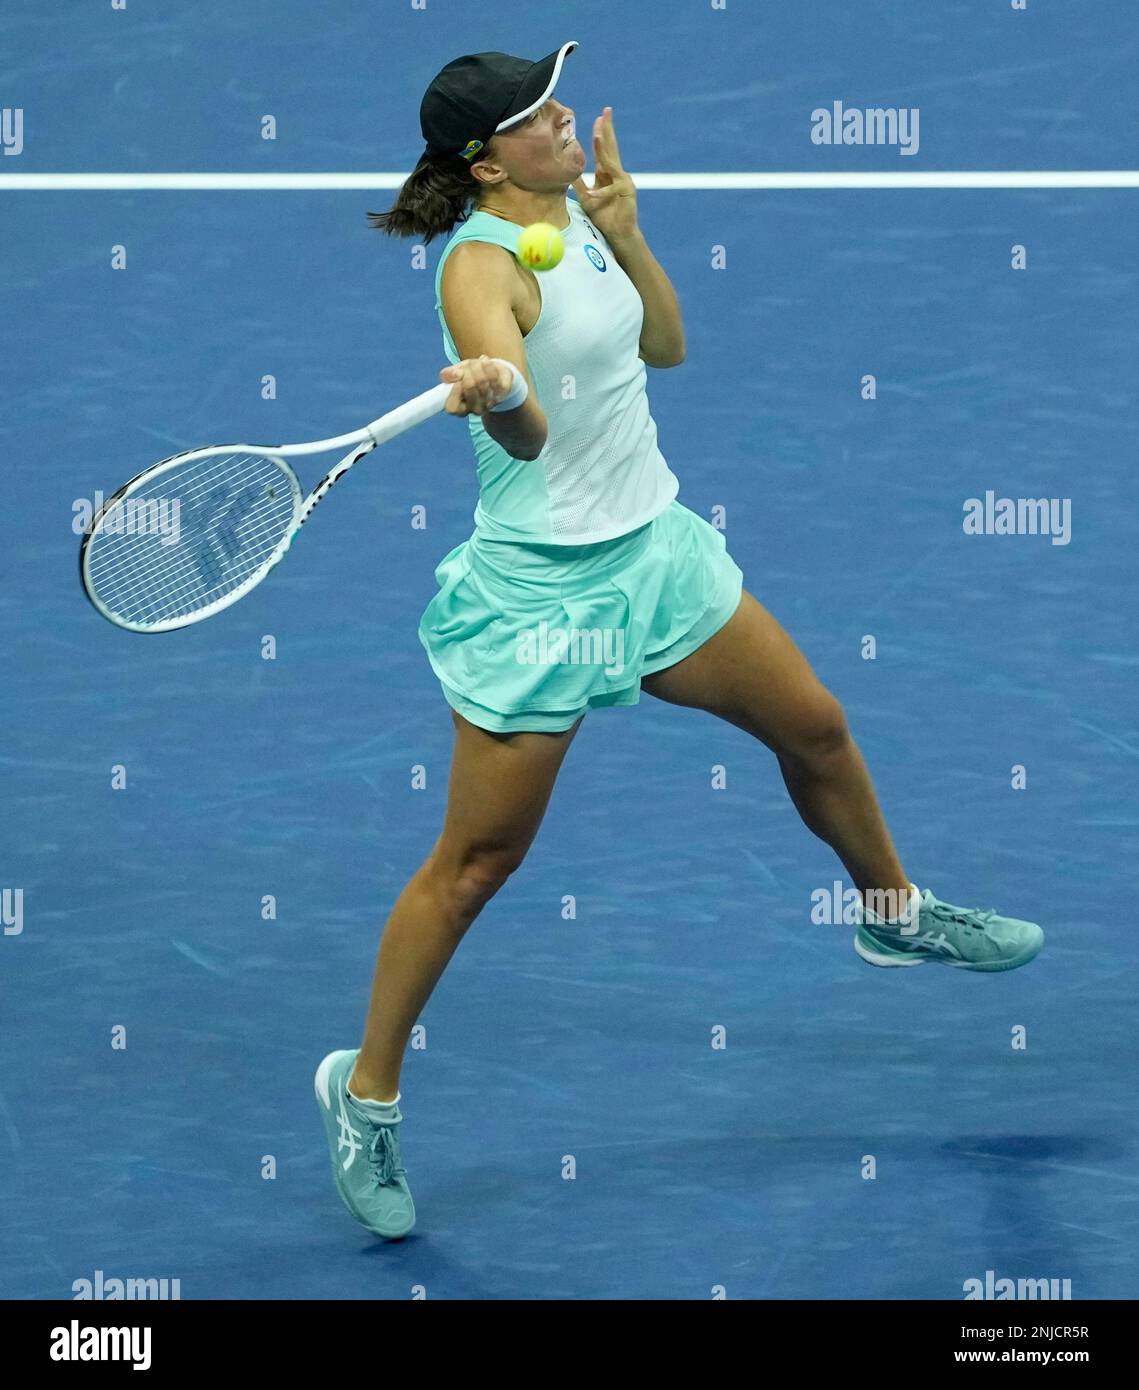 September 7, 2022 Iga Swiatek (POL) defeated Jessica Pegula (USA) 6-3, 7-6, at the US Open being played at Billie Jean King Ntional Tennis Center in Flushing, Queens, New York / USA ©